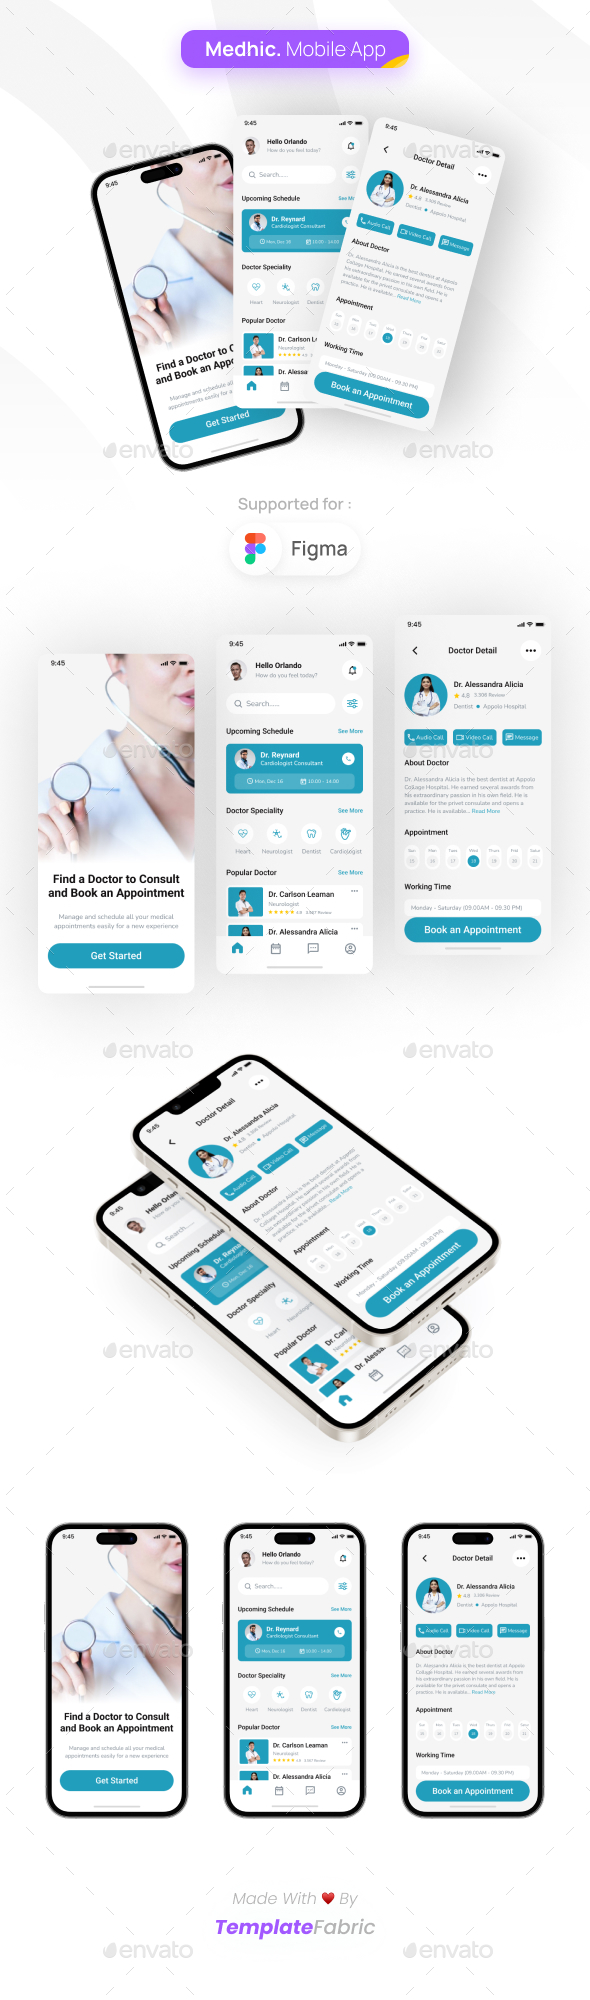 [DOWNLOAD]Medhic - Doctor Appointment Mobile App UI Kit